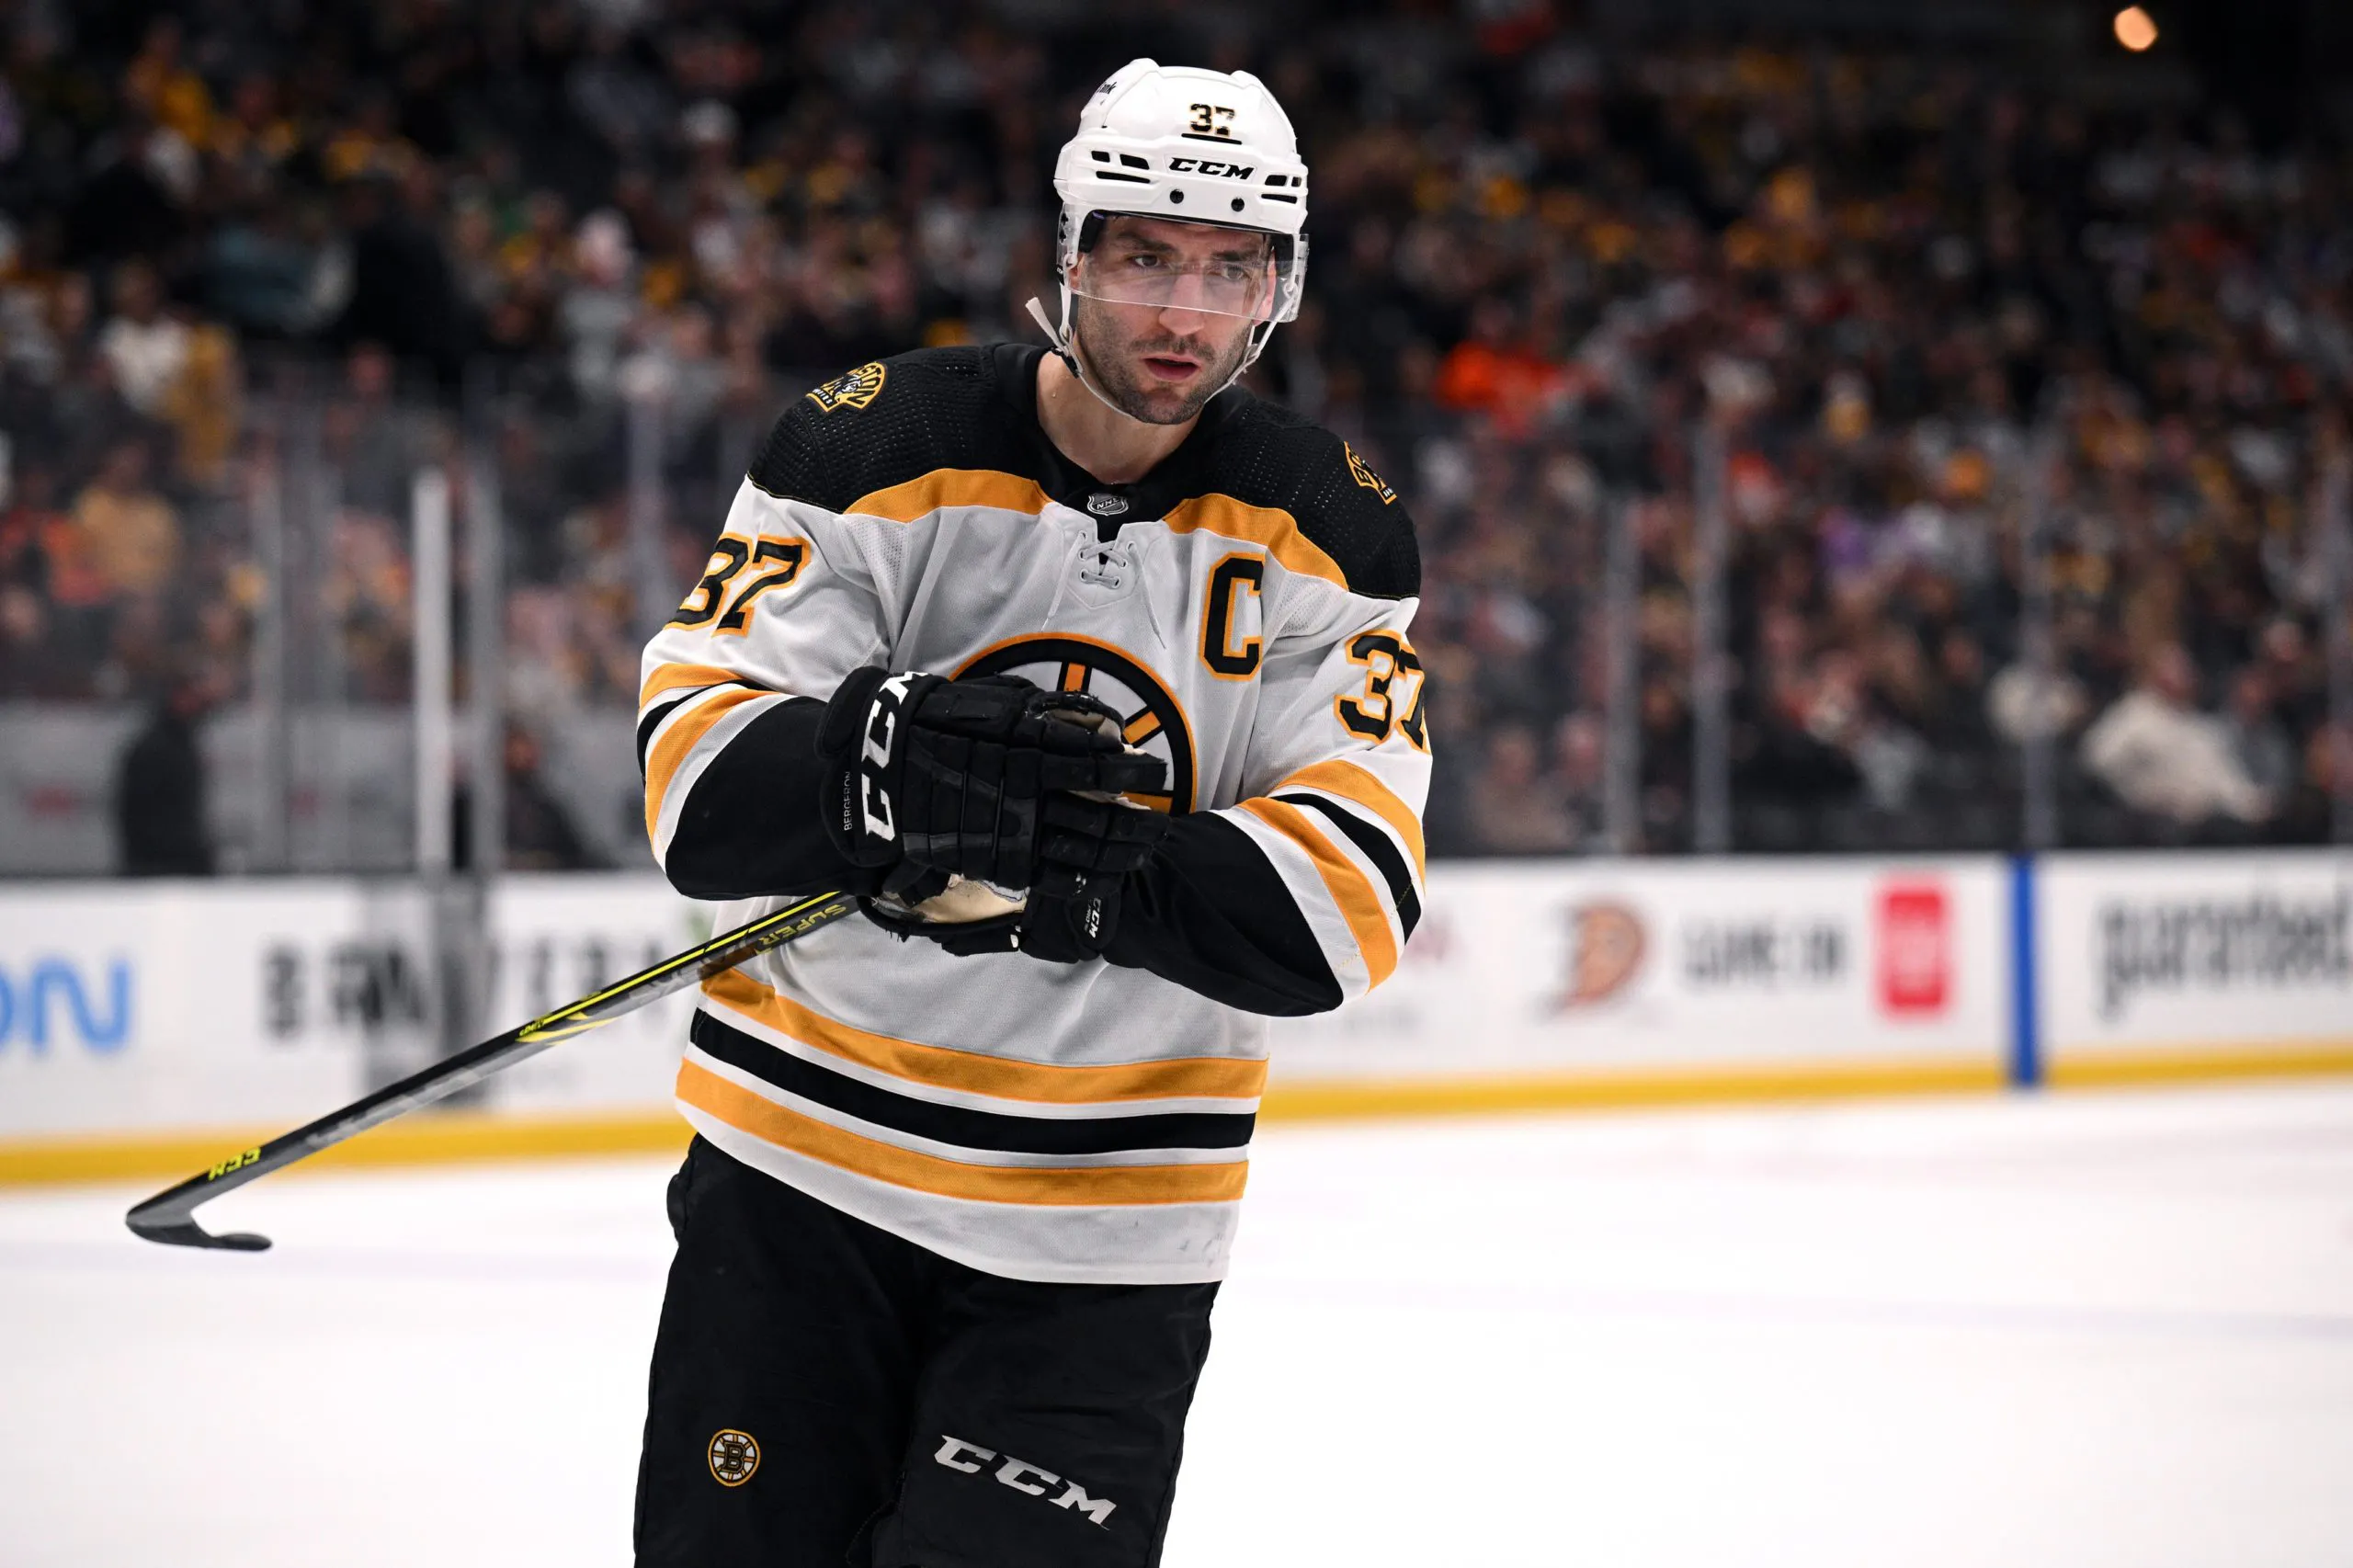 Report: Patrice Bergeron to re-sign with Boston Bruins on likely one-year deal